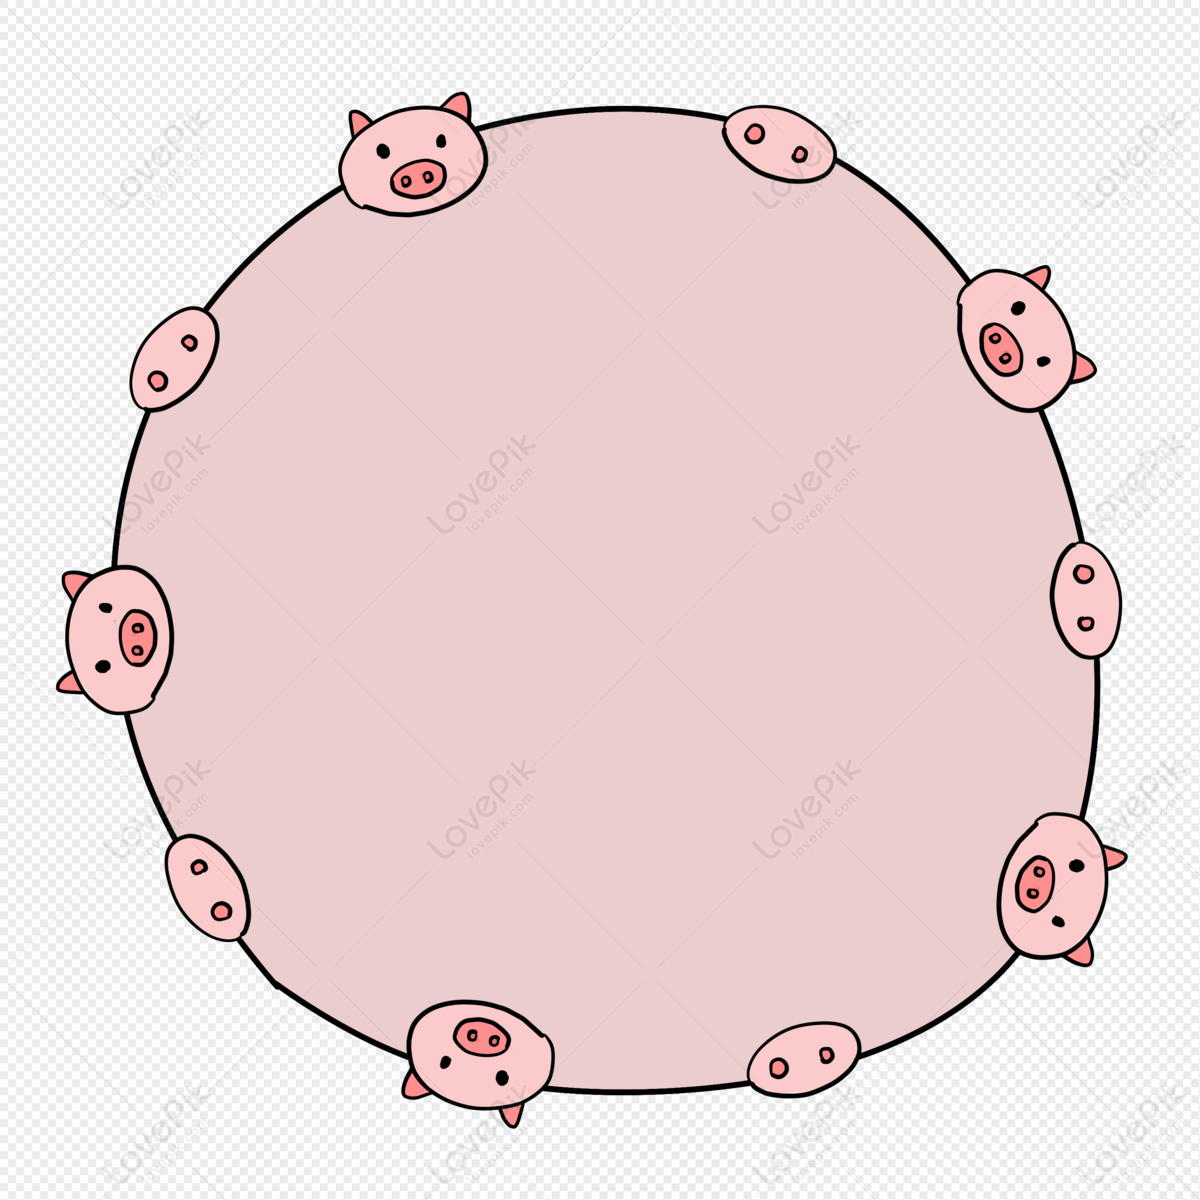 Hand Drawn Cartoon Pig Pig Pig Nose Border Dialog Free PNG And Clipart  Image For Free Download - Lovepik | 401422939